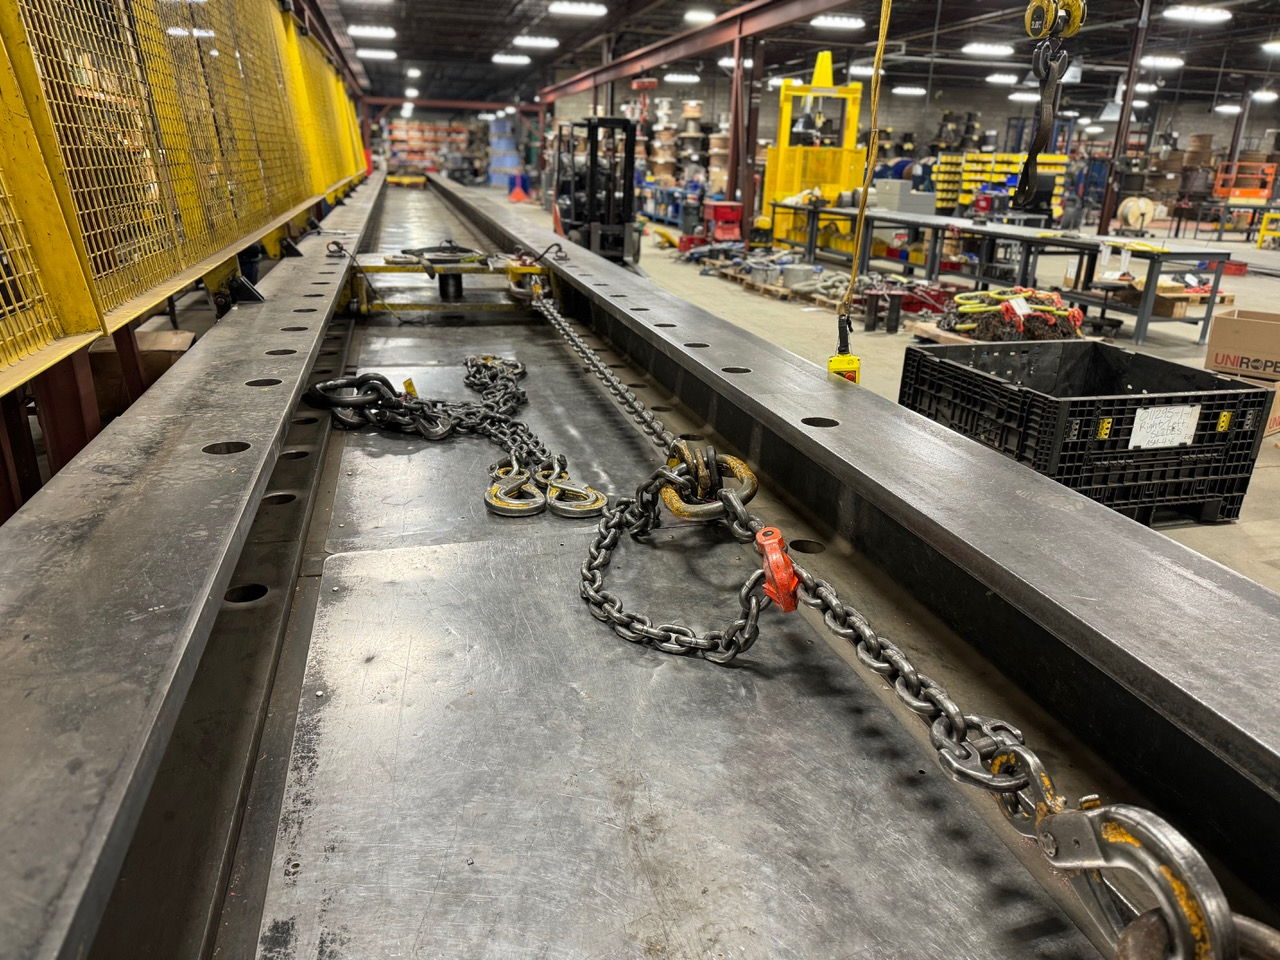 Following inspection and repair of this 7/8” adjustable chain sling, a proof test is performed prior to return to the customer.